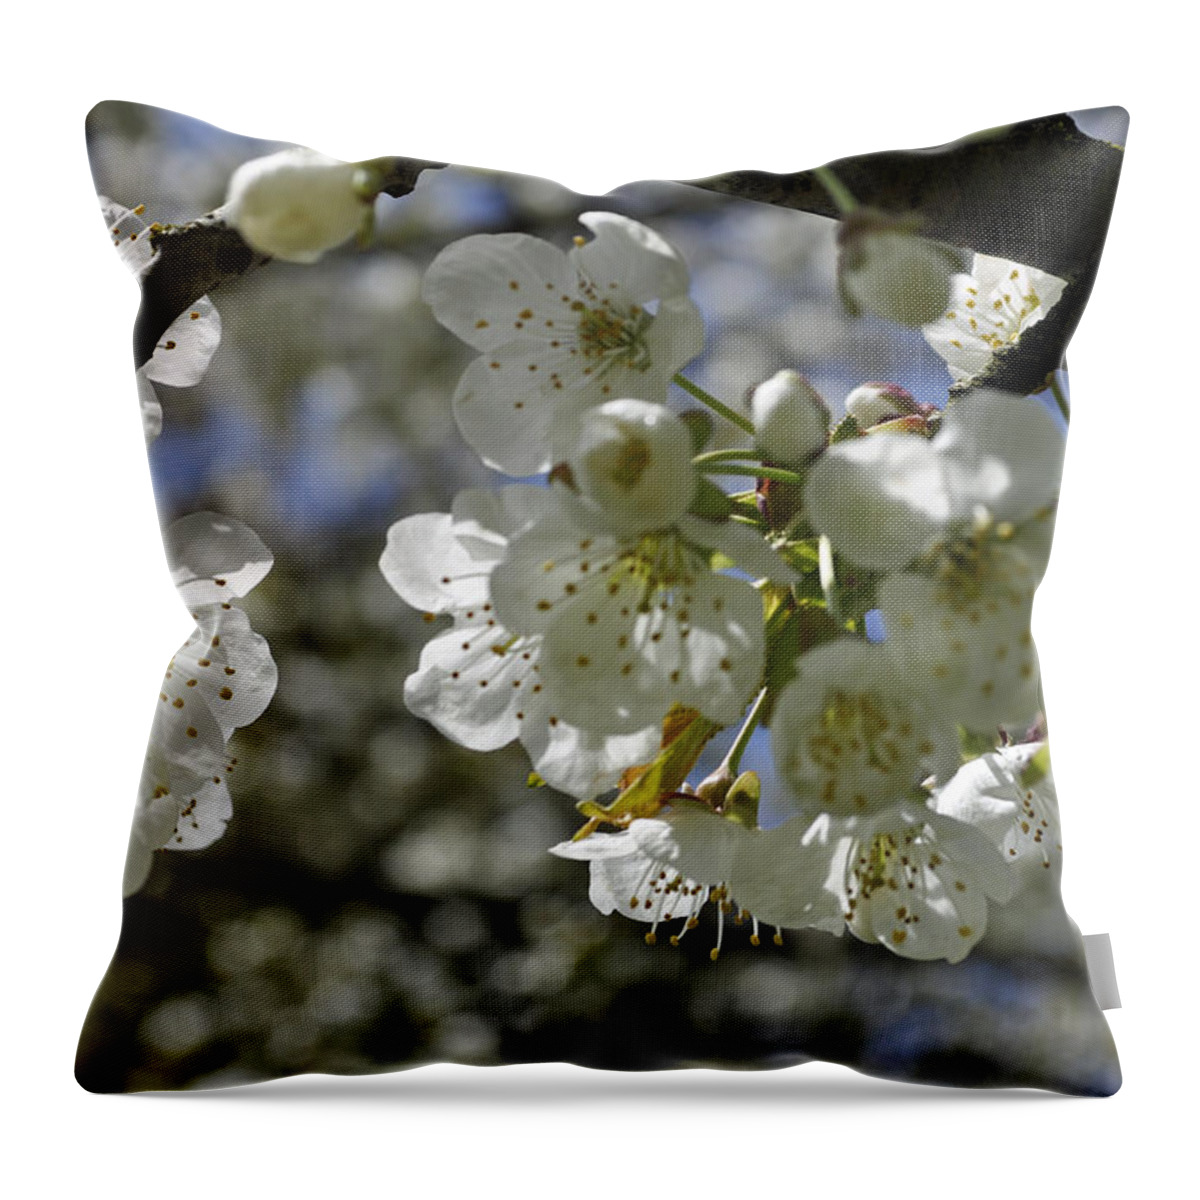 Cherry Throw Pillow featuring the photograph Cherry Blossoms by Tikvah's Hope